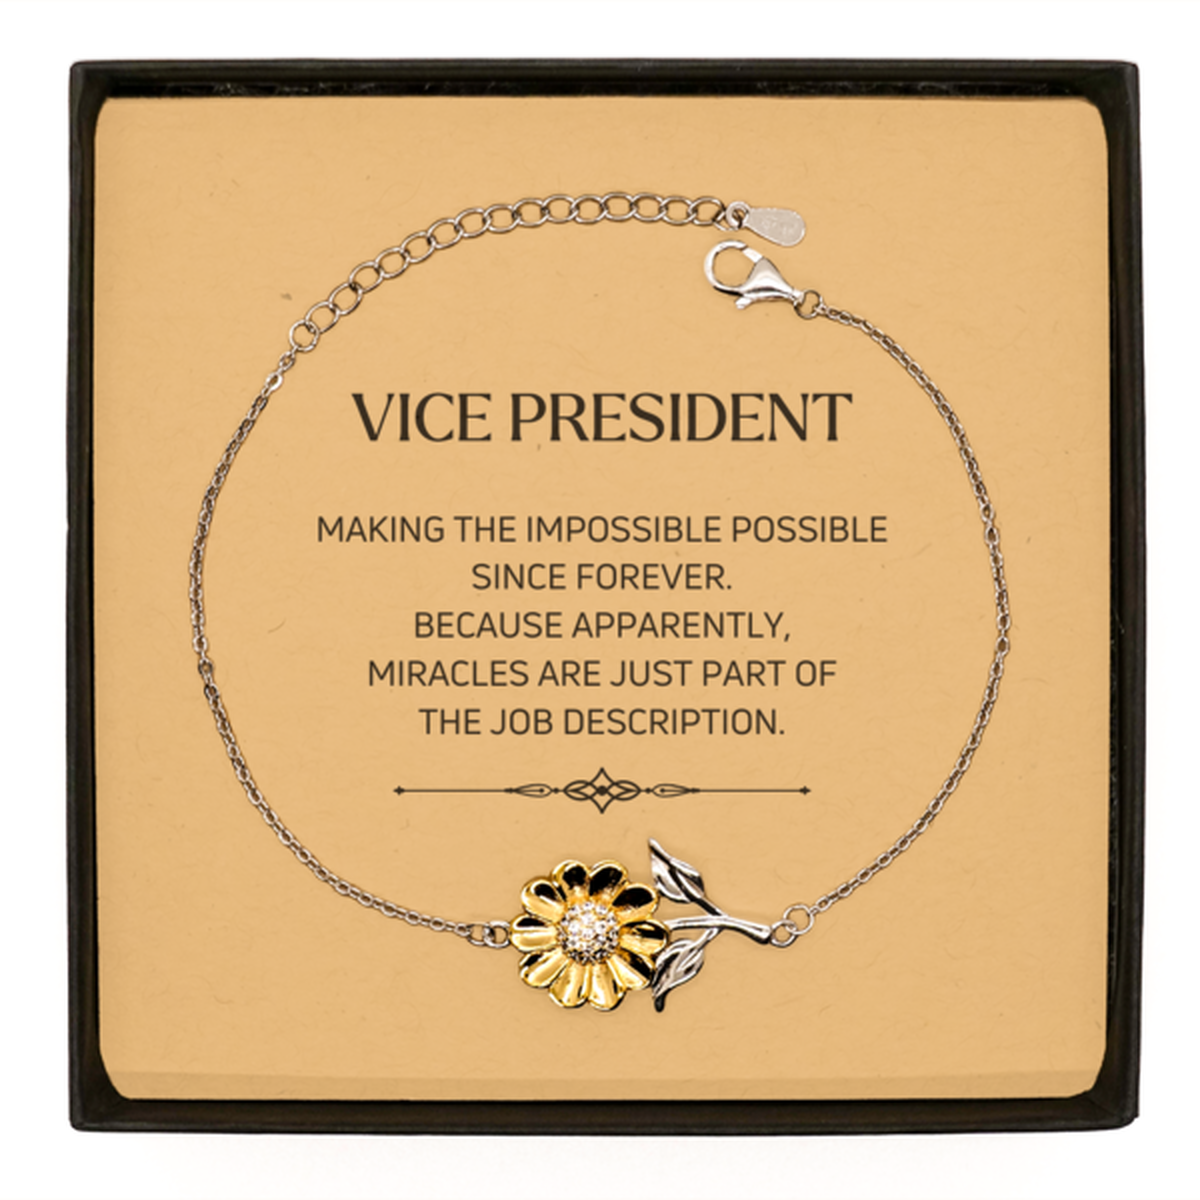 Funny Vice President Gifts, Miracles are just part of the job description, Inspirational Birthday Sunflower Bracelet For Vice President, Men, Women, Coworkers, Friends, Boss